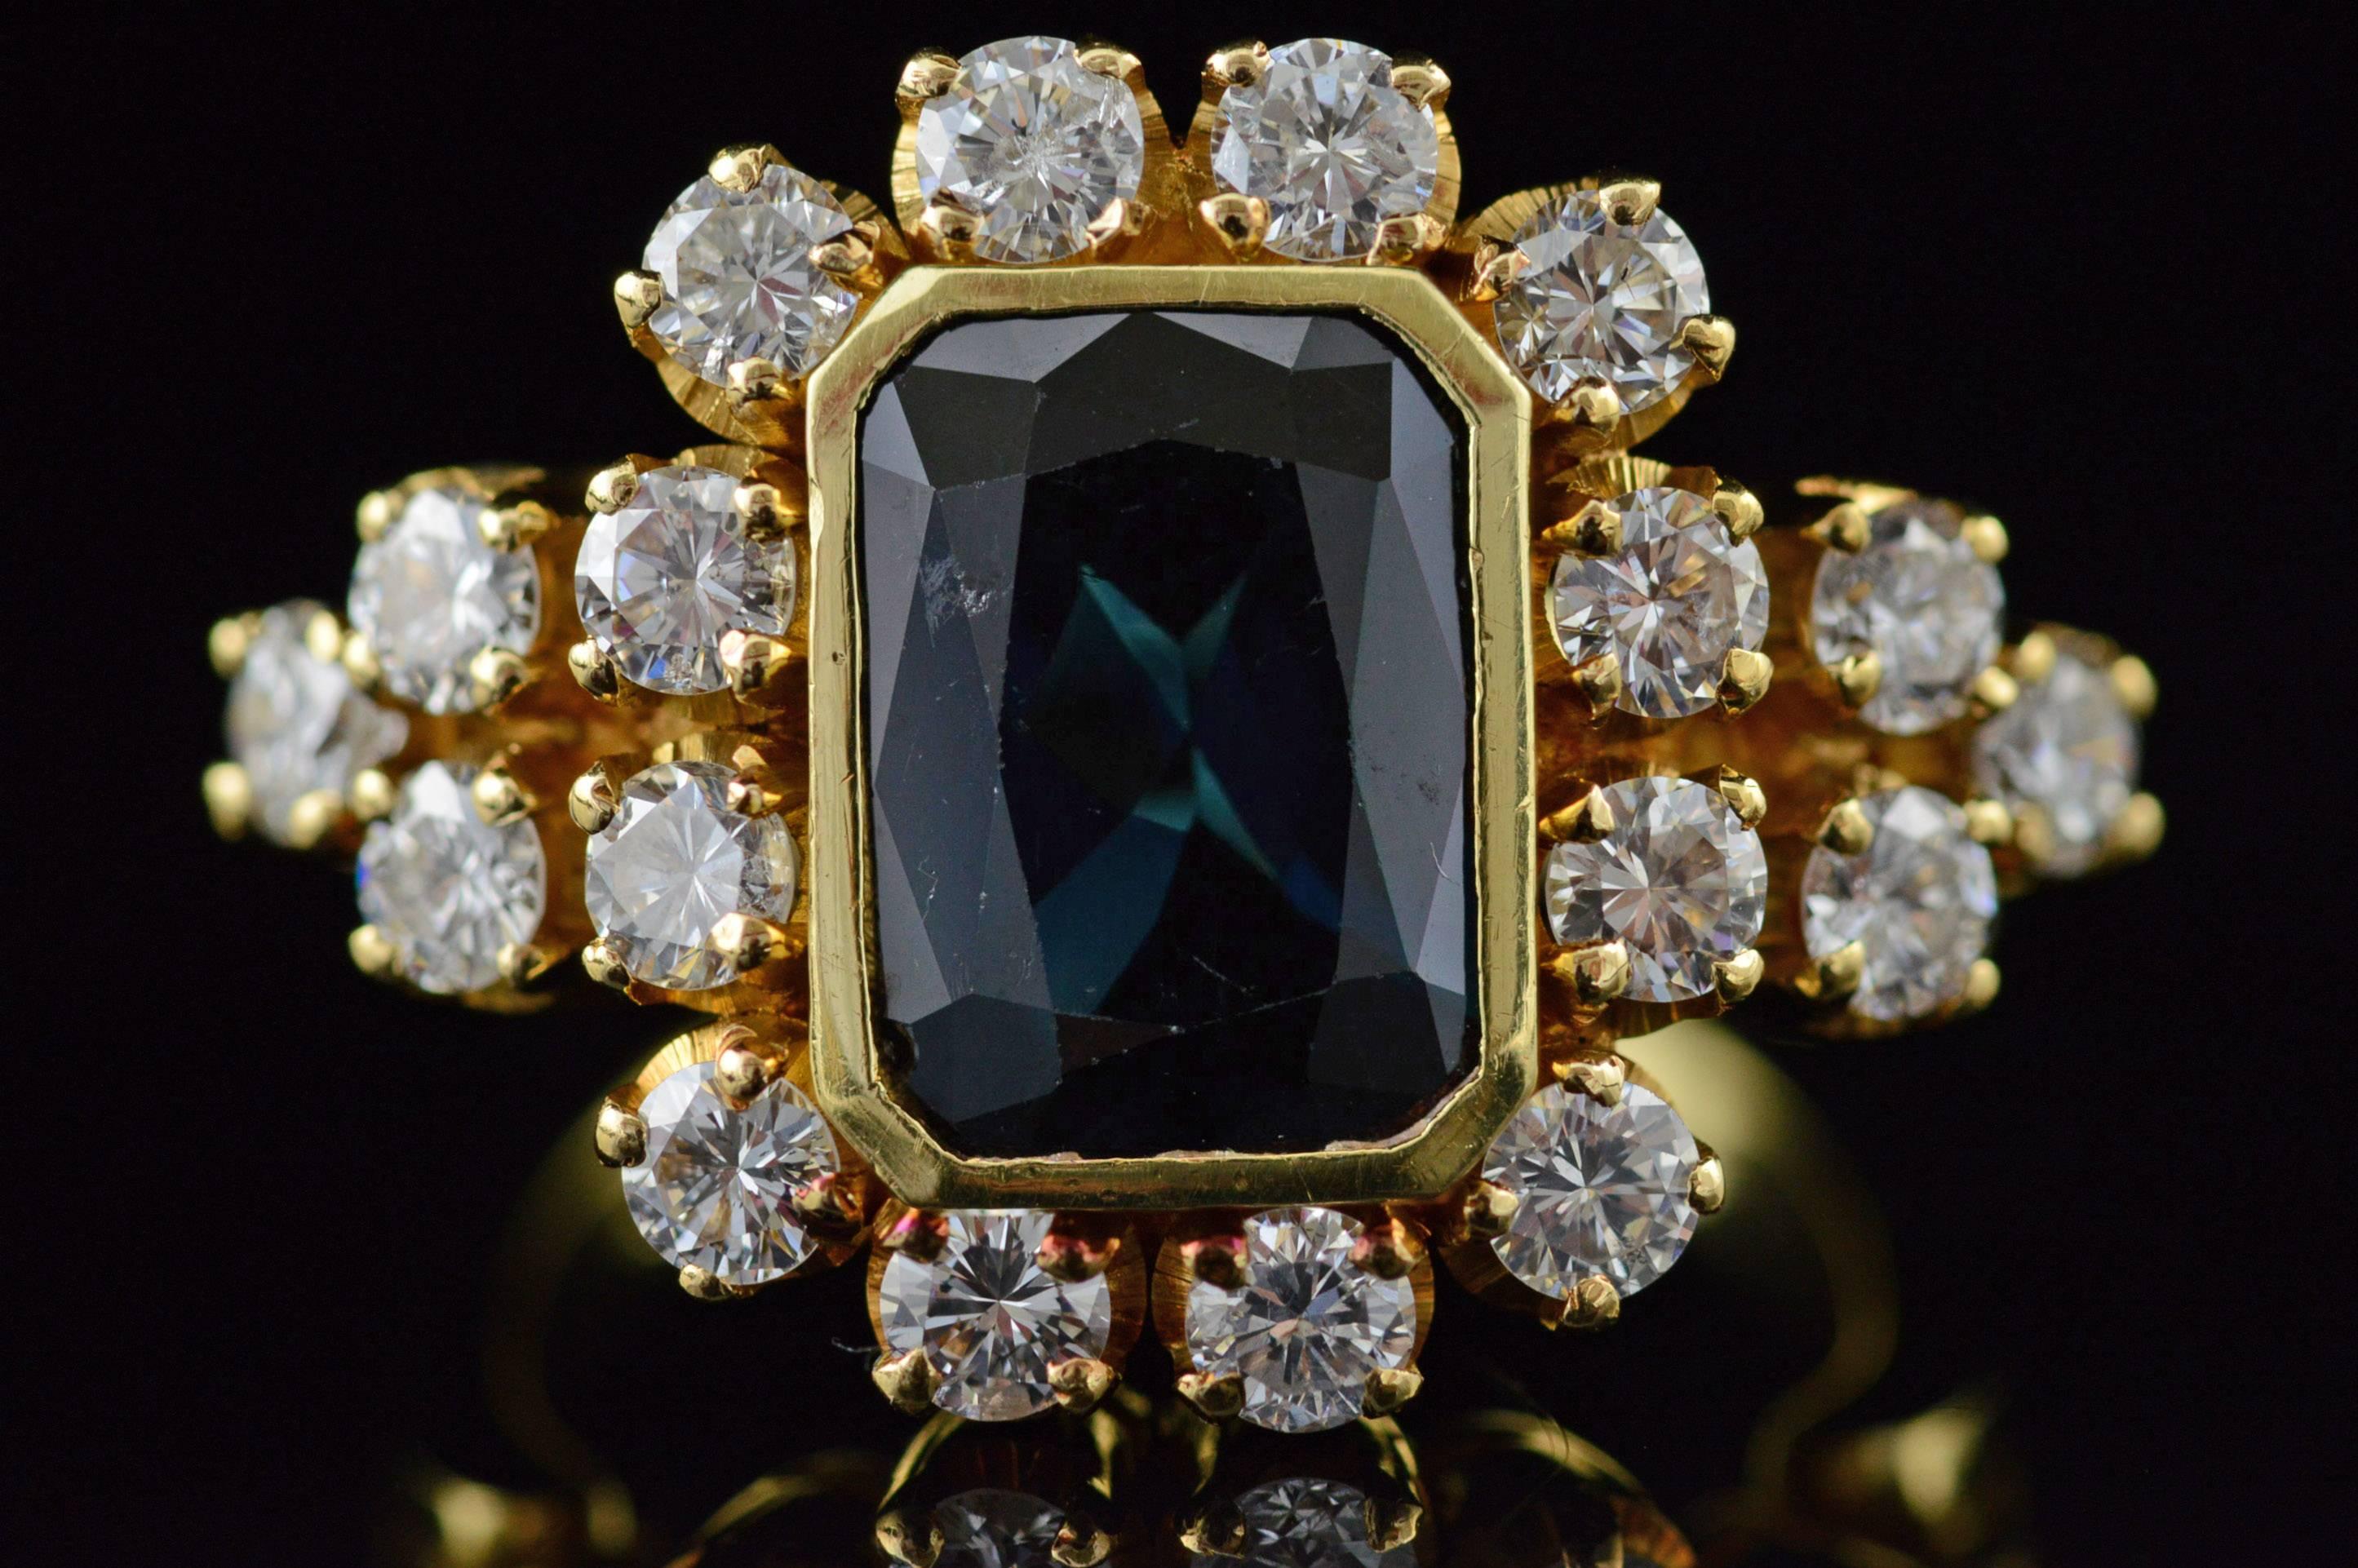 All diamonds are graded according to GIA grading standards. (When applicable)

·Item: 18K 4.00 CW Sapphire 1.80 Ctw Diamond Statement Ring Size 7.5 Yellow Gold

·Era: Vintage / 1950s

·Composition: 18k Gold Marked/Tested

·Center Gem Stone: 4.00 Ct